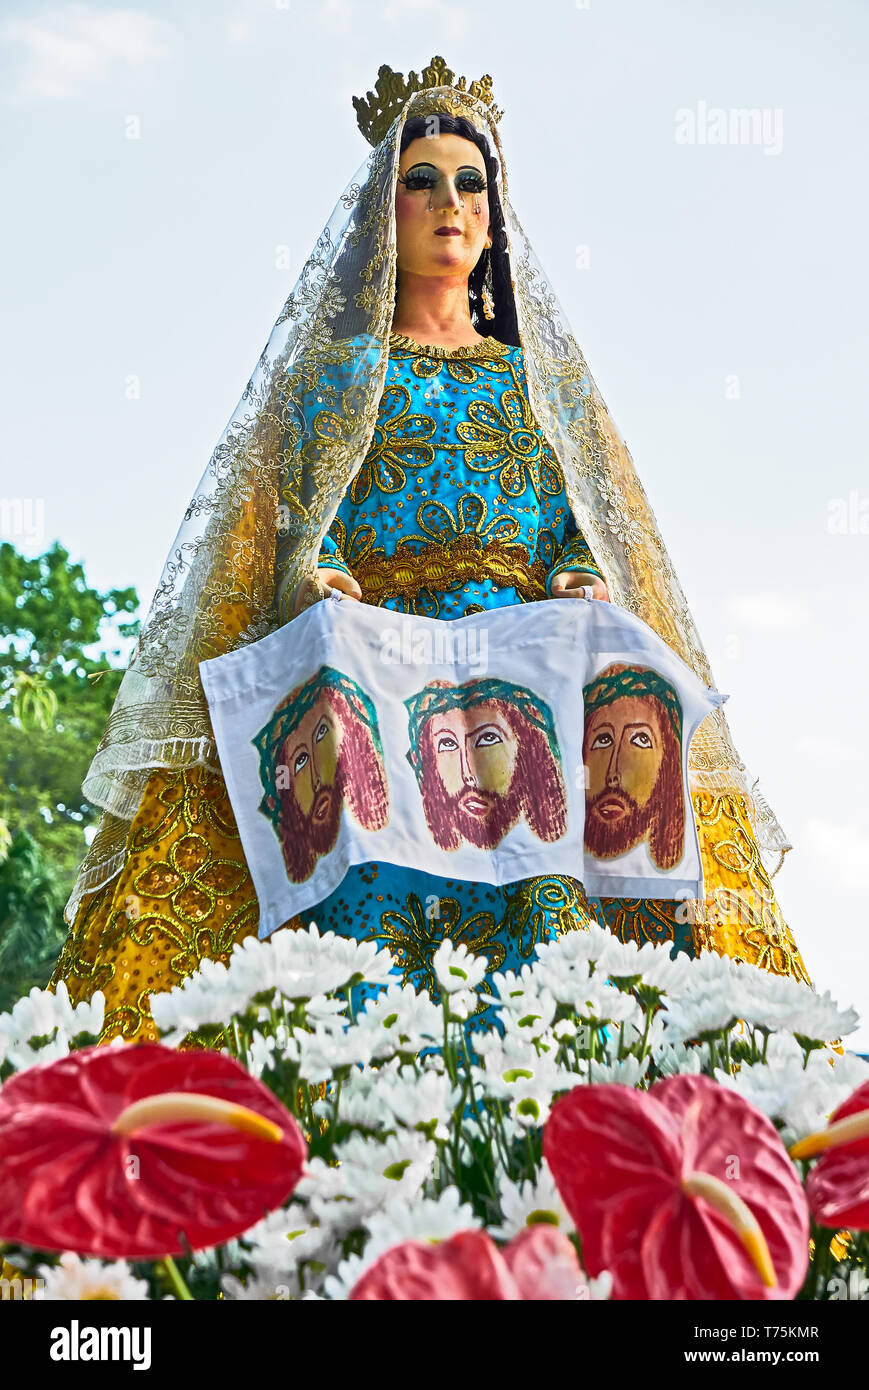 Leon, Iloilo, Philippines: Isolated view of an old decorated Statue of Mother Mary at a Good Friday procession around the church Stock Photo